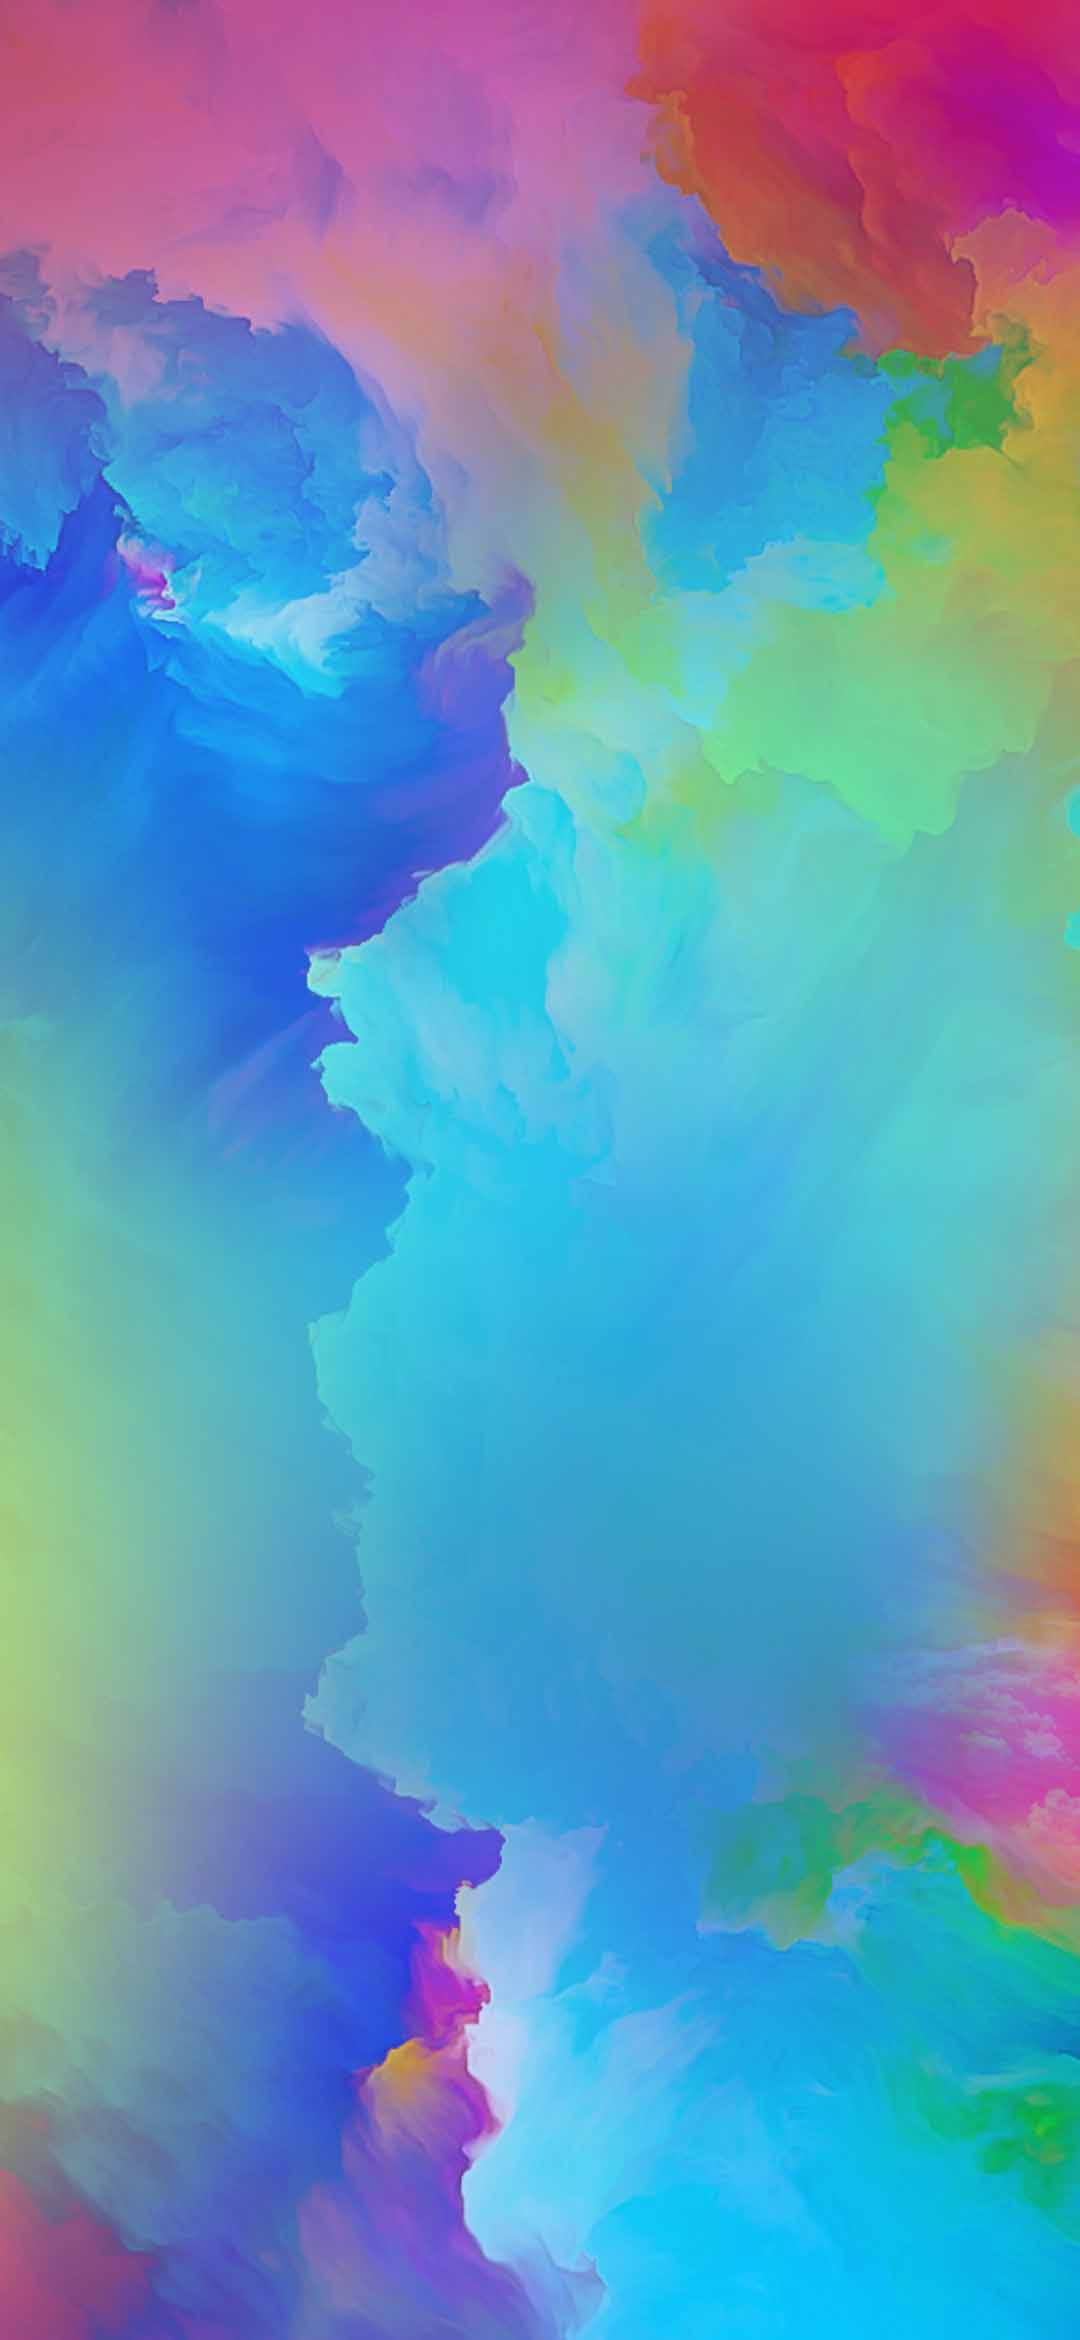 Samsung Galaxy A70 Wallpapers FHD   Download DroidViews